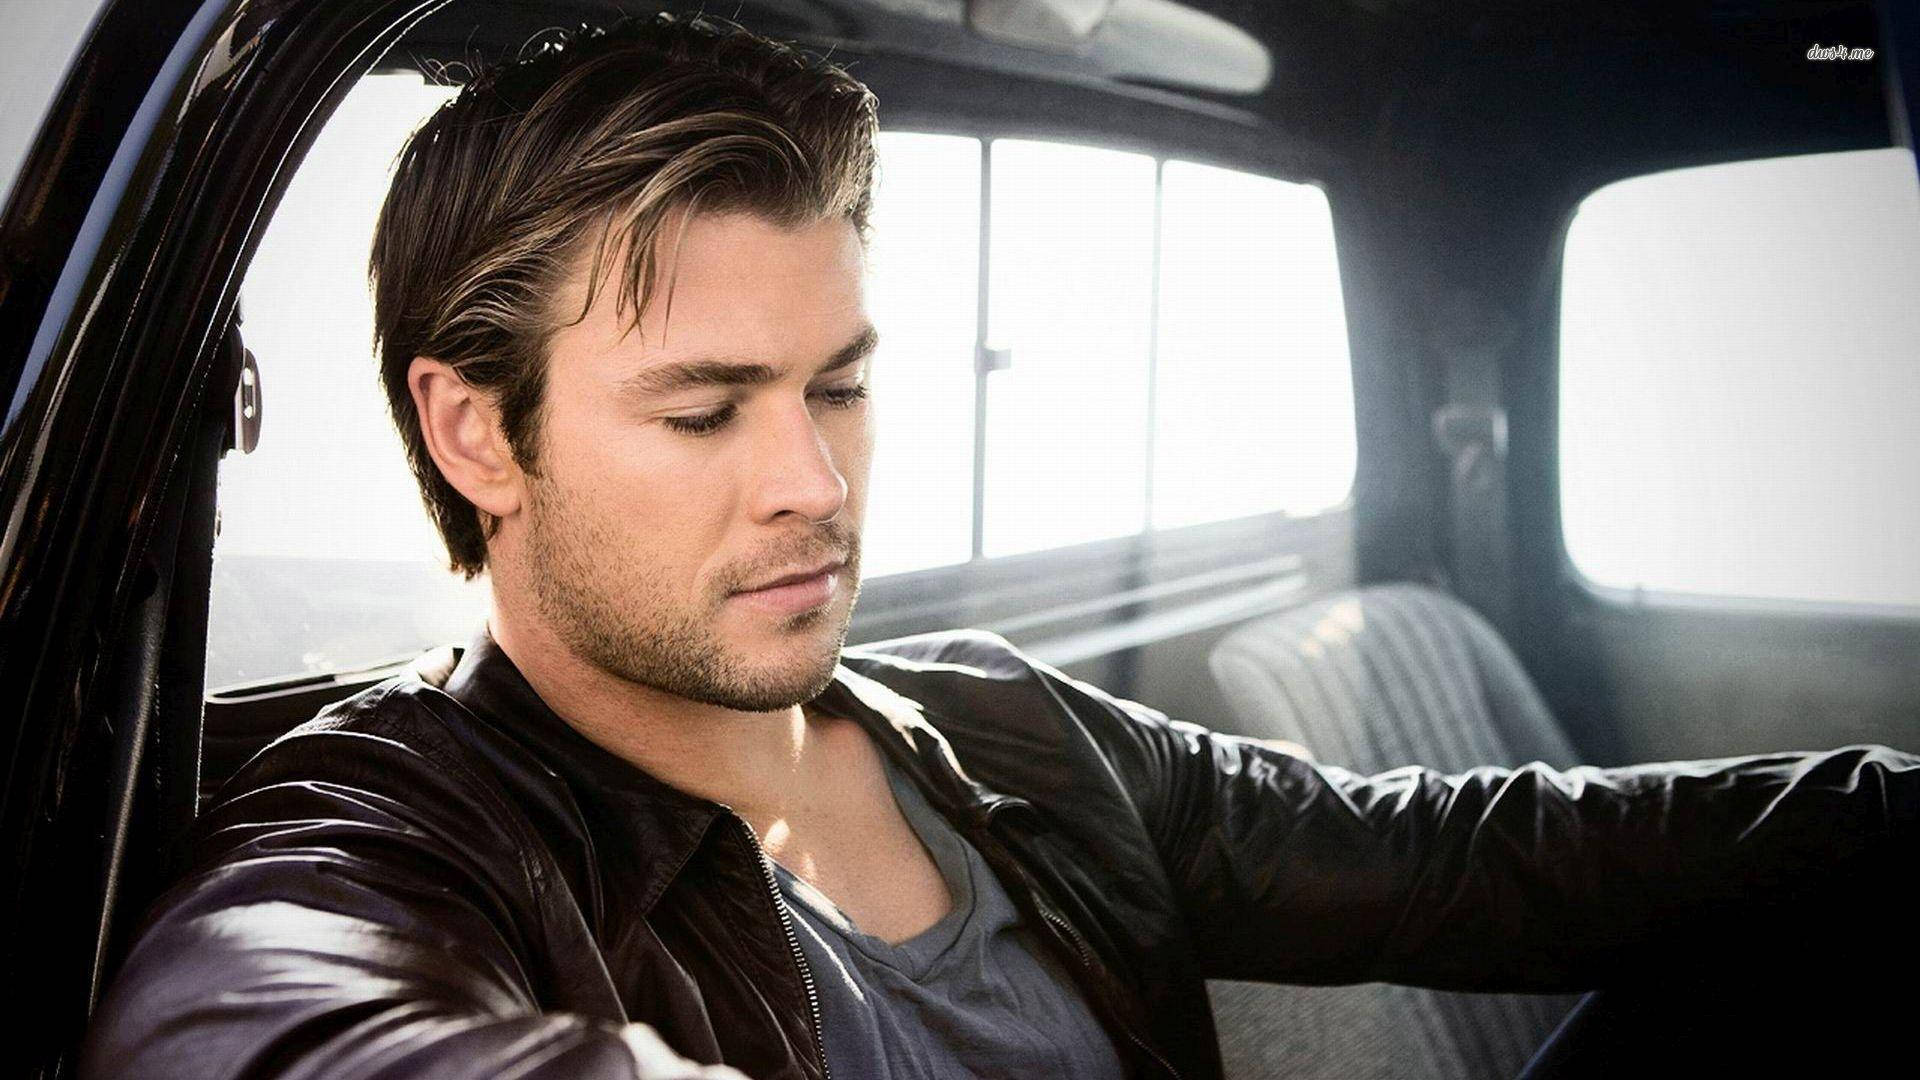 Chris Hemsworth Driving In A Luxurious Car Background